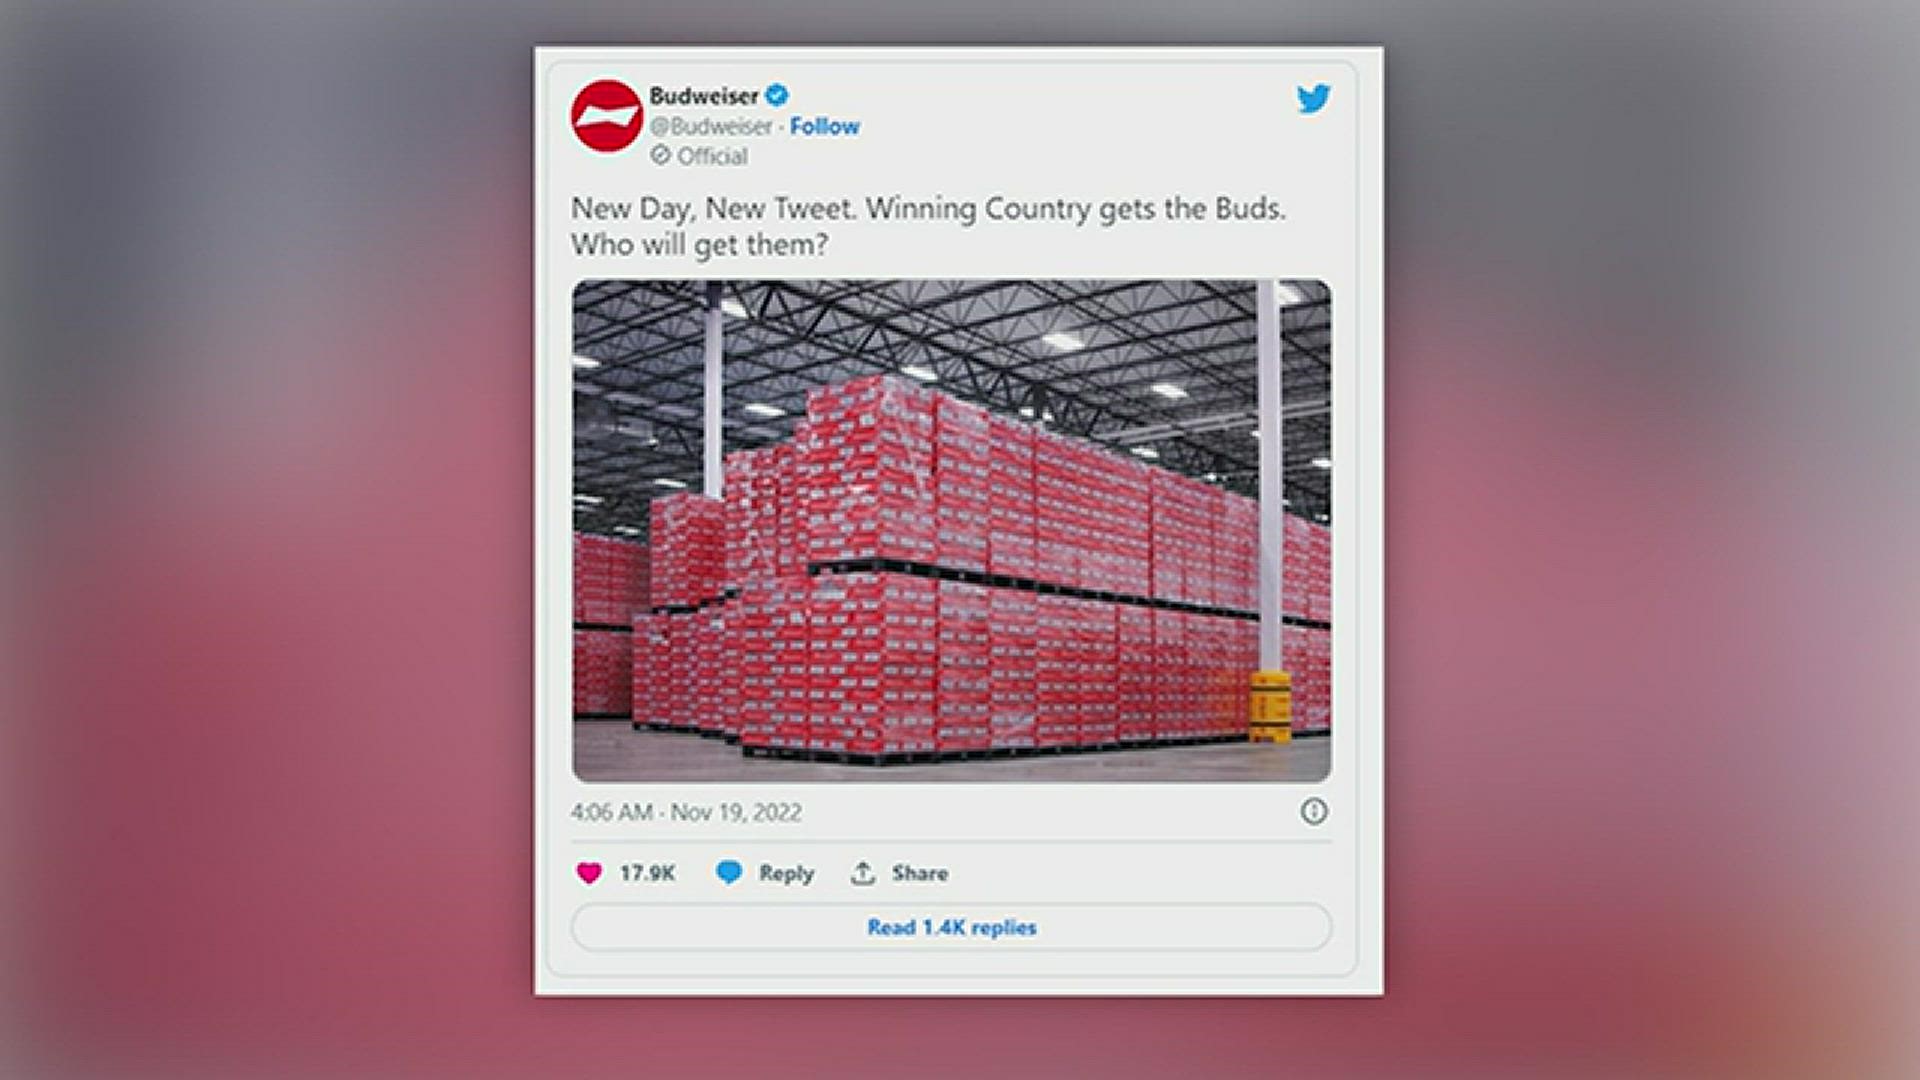 After Qatar decided to ban alcohol at World Cup stadiums, Budweiser announces it will send all the extra beer it would have sold to the winning nation, CNN reports.